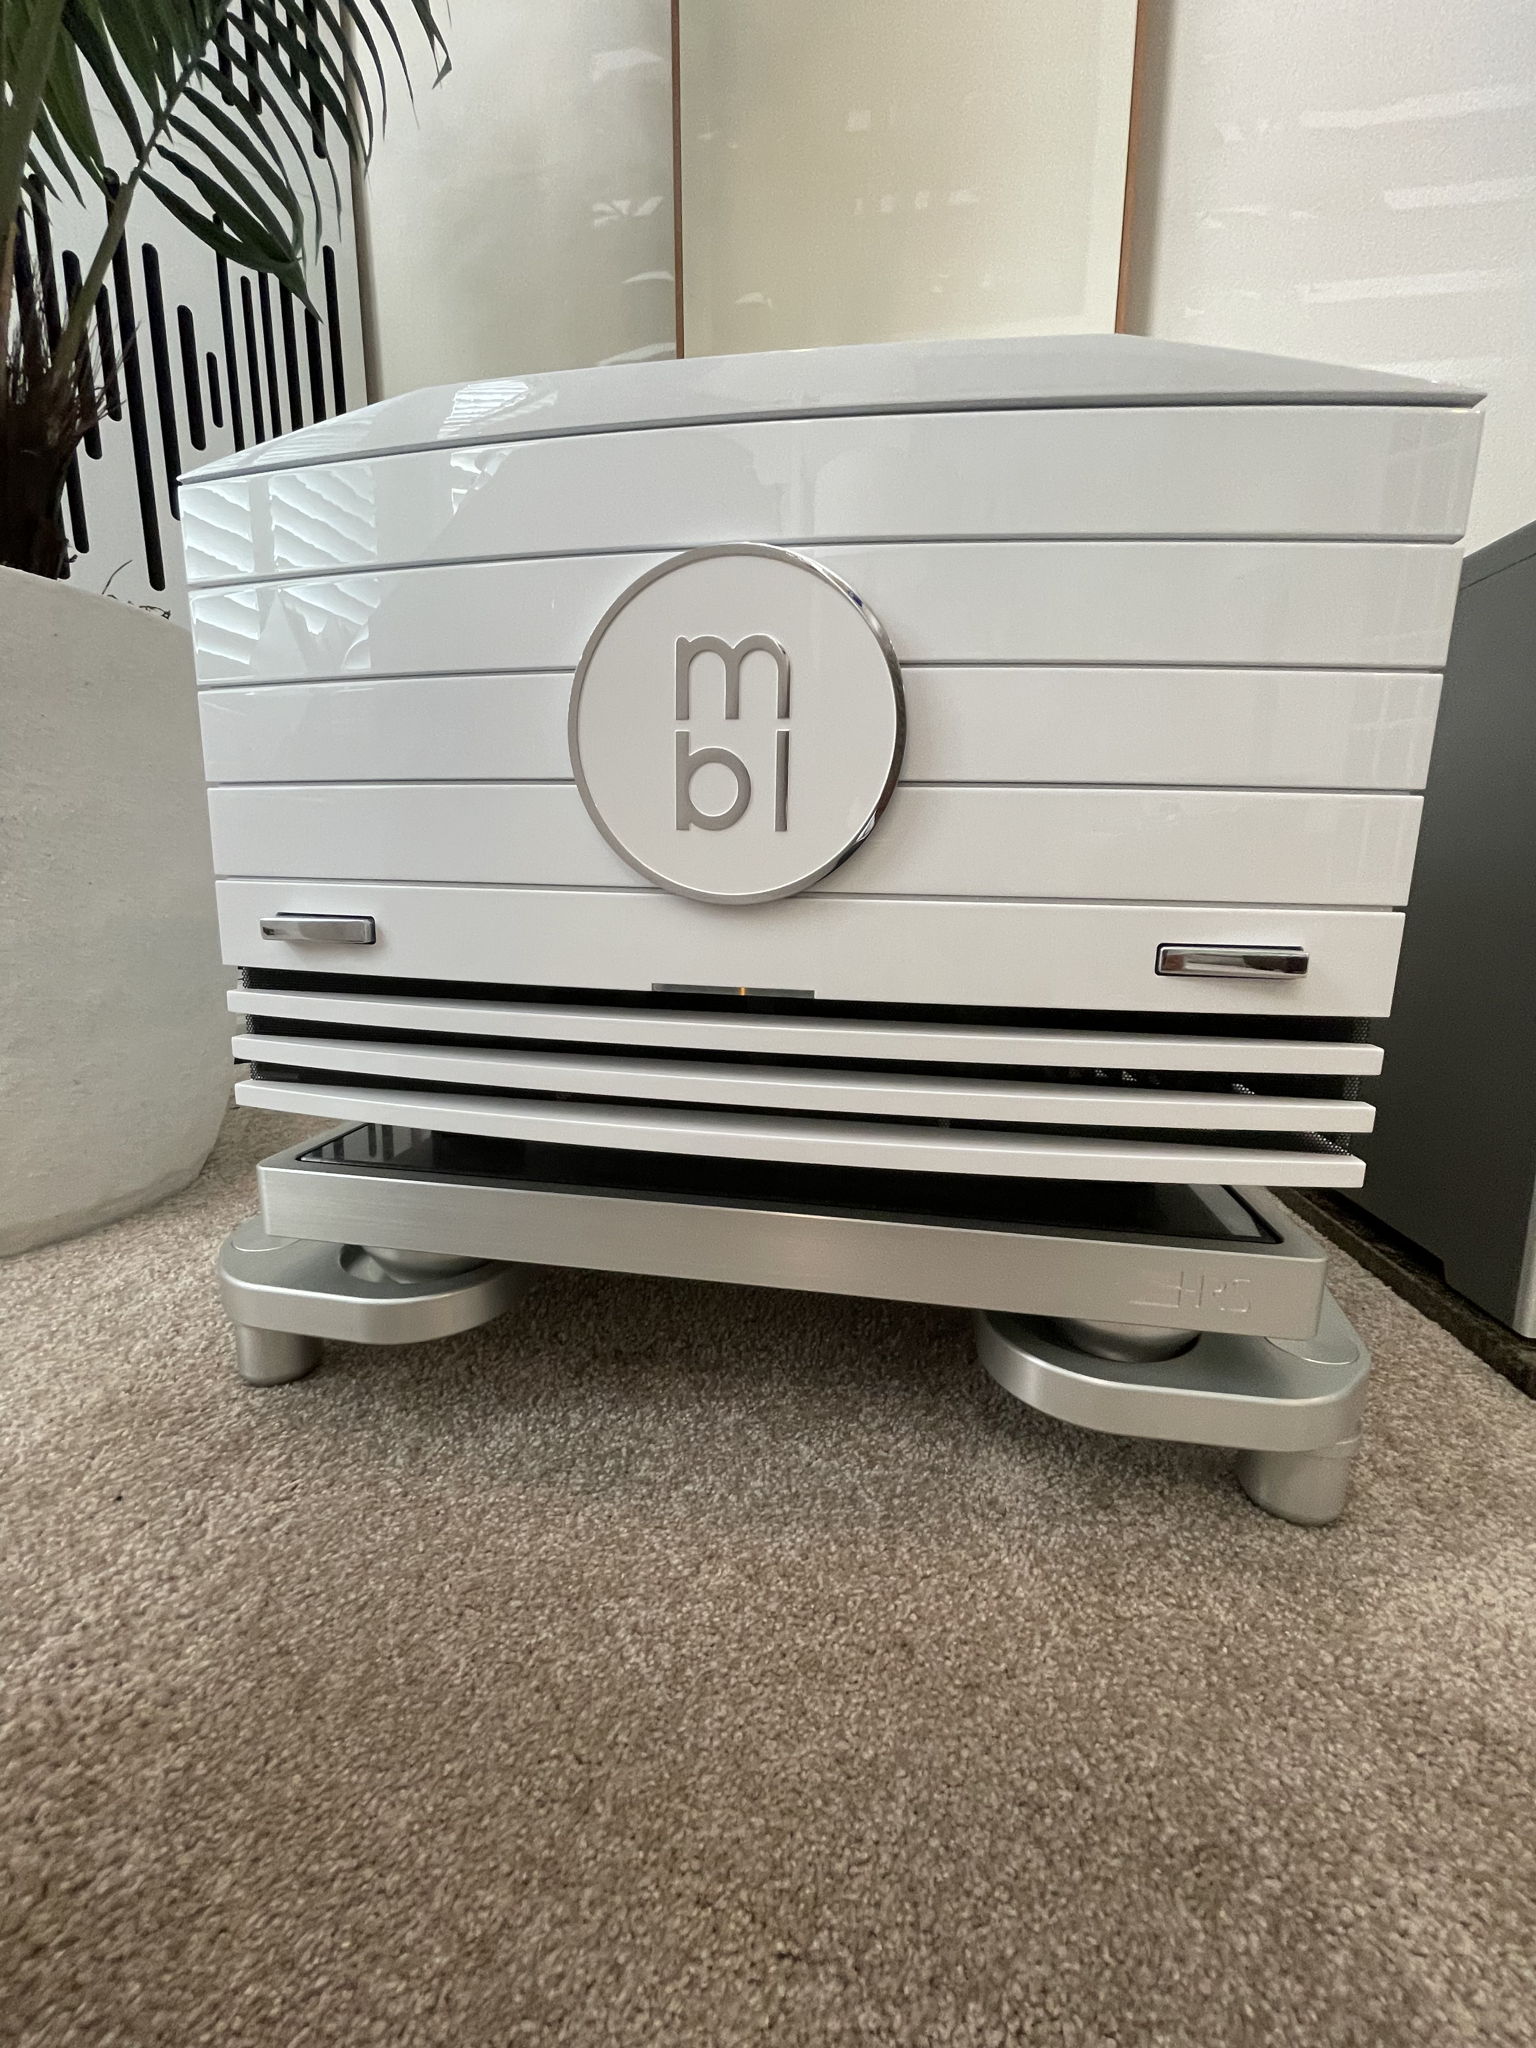 MBL 9008 A Amplifiers w/ HRS Stands (Pair, White/Silver)